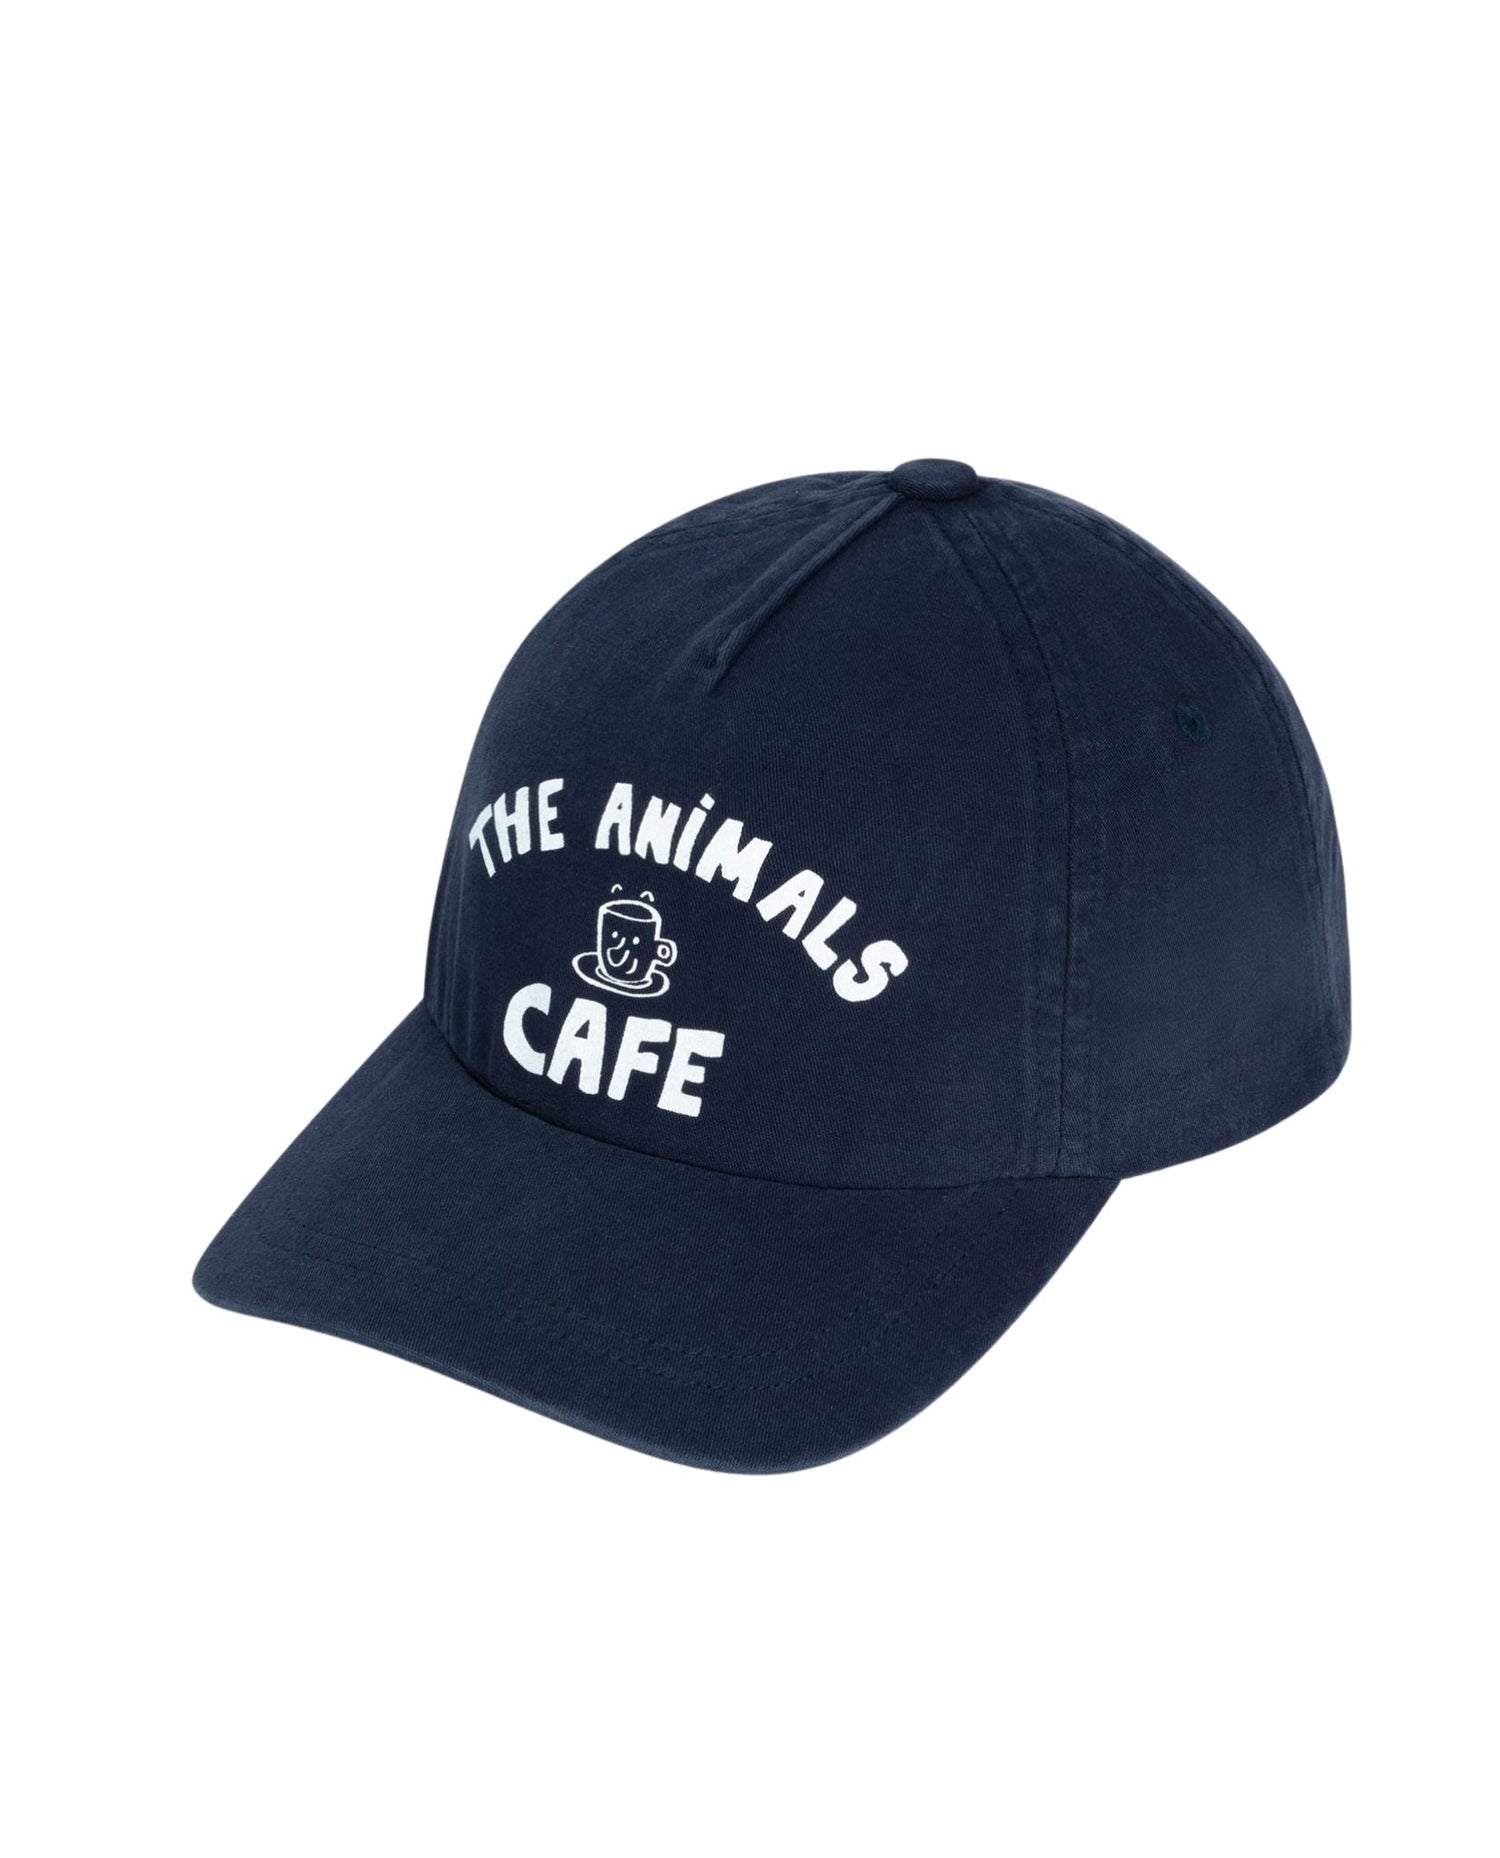 Hamster kids cap Navy Accessories The Animals Observatory 